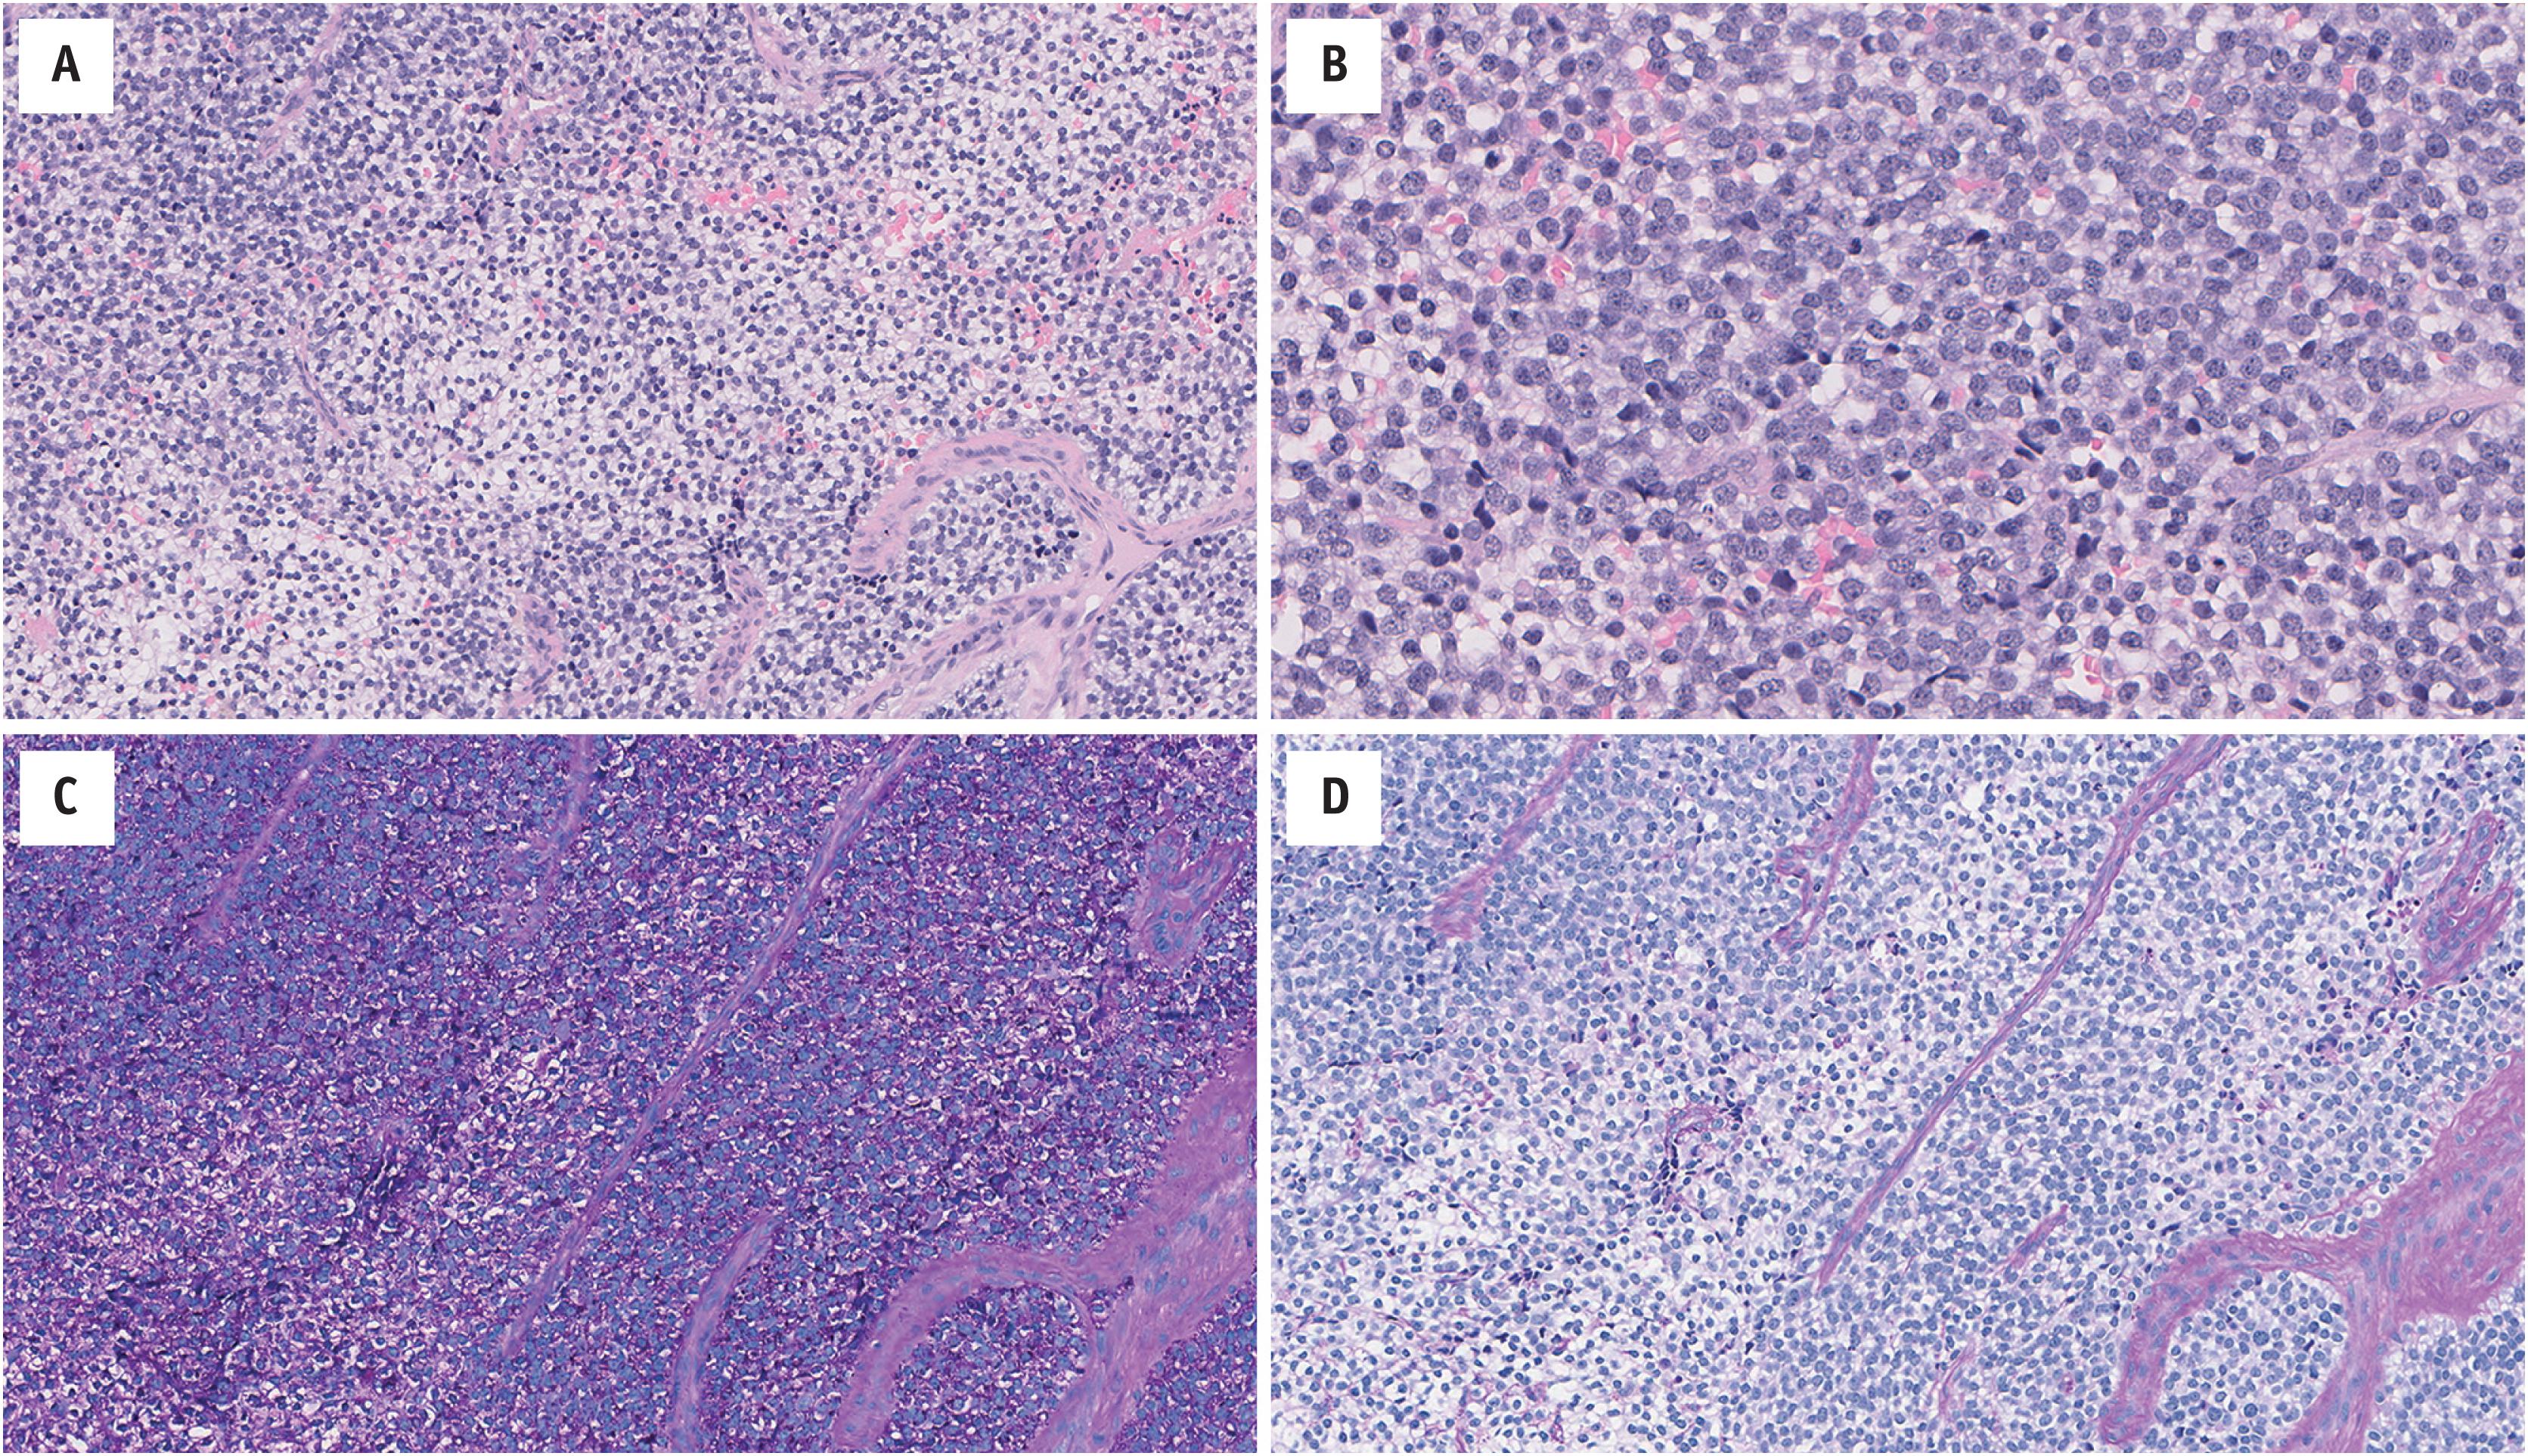 Fig. 14.2, Ewing Family Tumor showing a conventional morphology ( EWSR1-FLI1 fusion gene identified by RNA-seq). (A) Sheets of small round cells with clear to pale eosinophilic cytoplasm with a vague lobular pattern. The nuclei are round and monomorphic. The tumor is supported by a delicate thin-walled vasculature. (B) The cytoplasm is scant with indistinct cell borders. The nuclei have delicately speckled chromatin and small nucleoli. The presence of intracytoplasmic glycogen is highlighted using the periodic acid-Schiff stain: (C) with, and (D) without diastase.